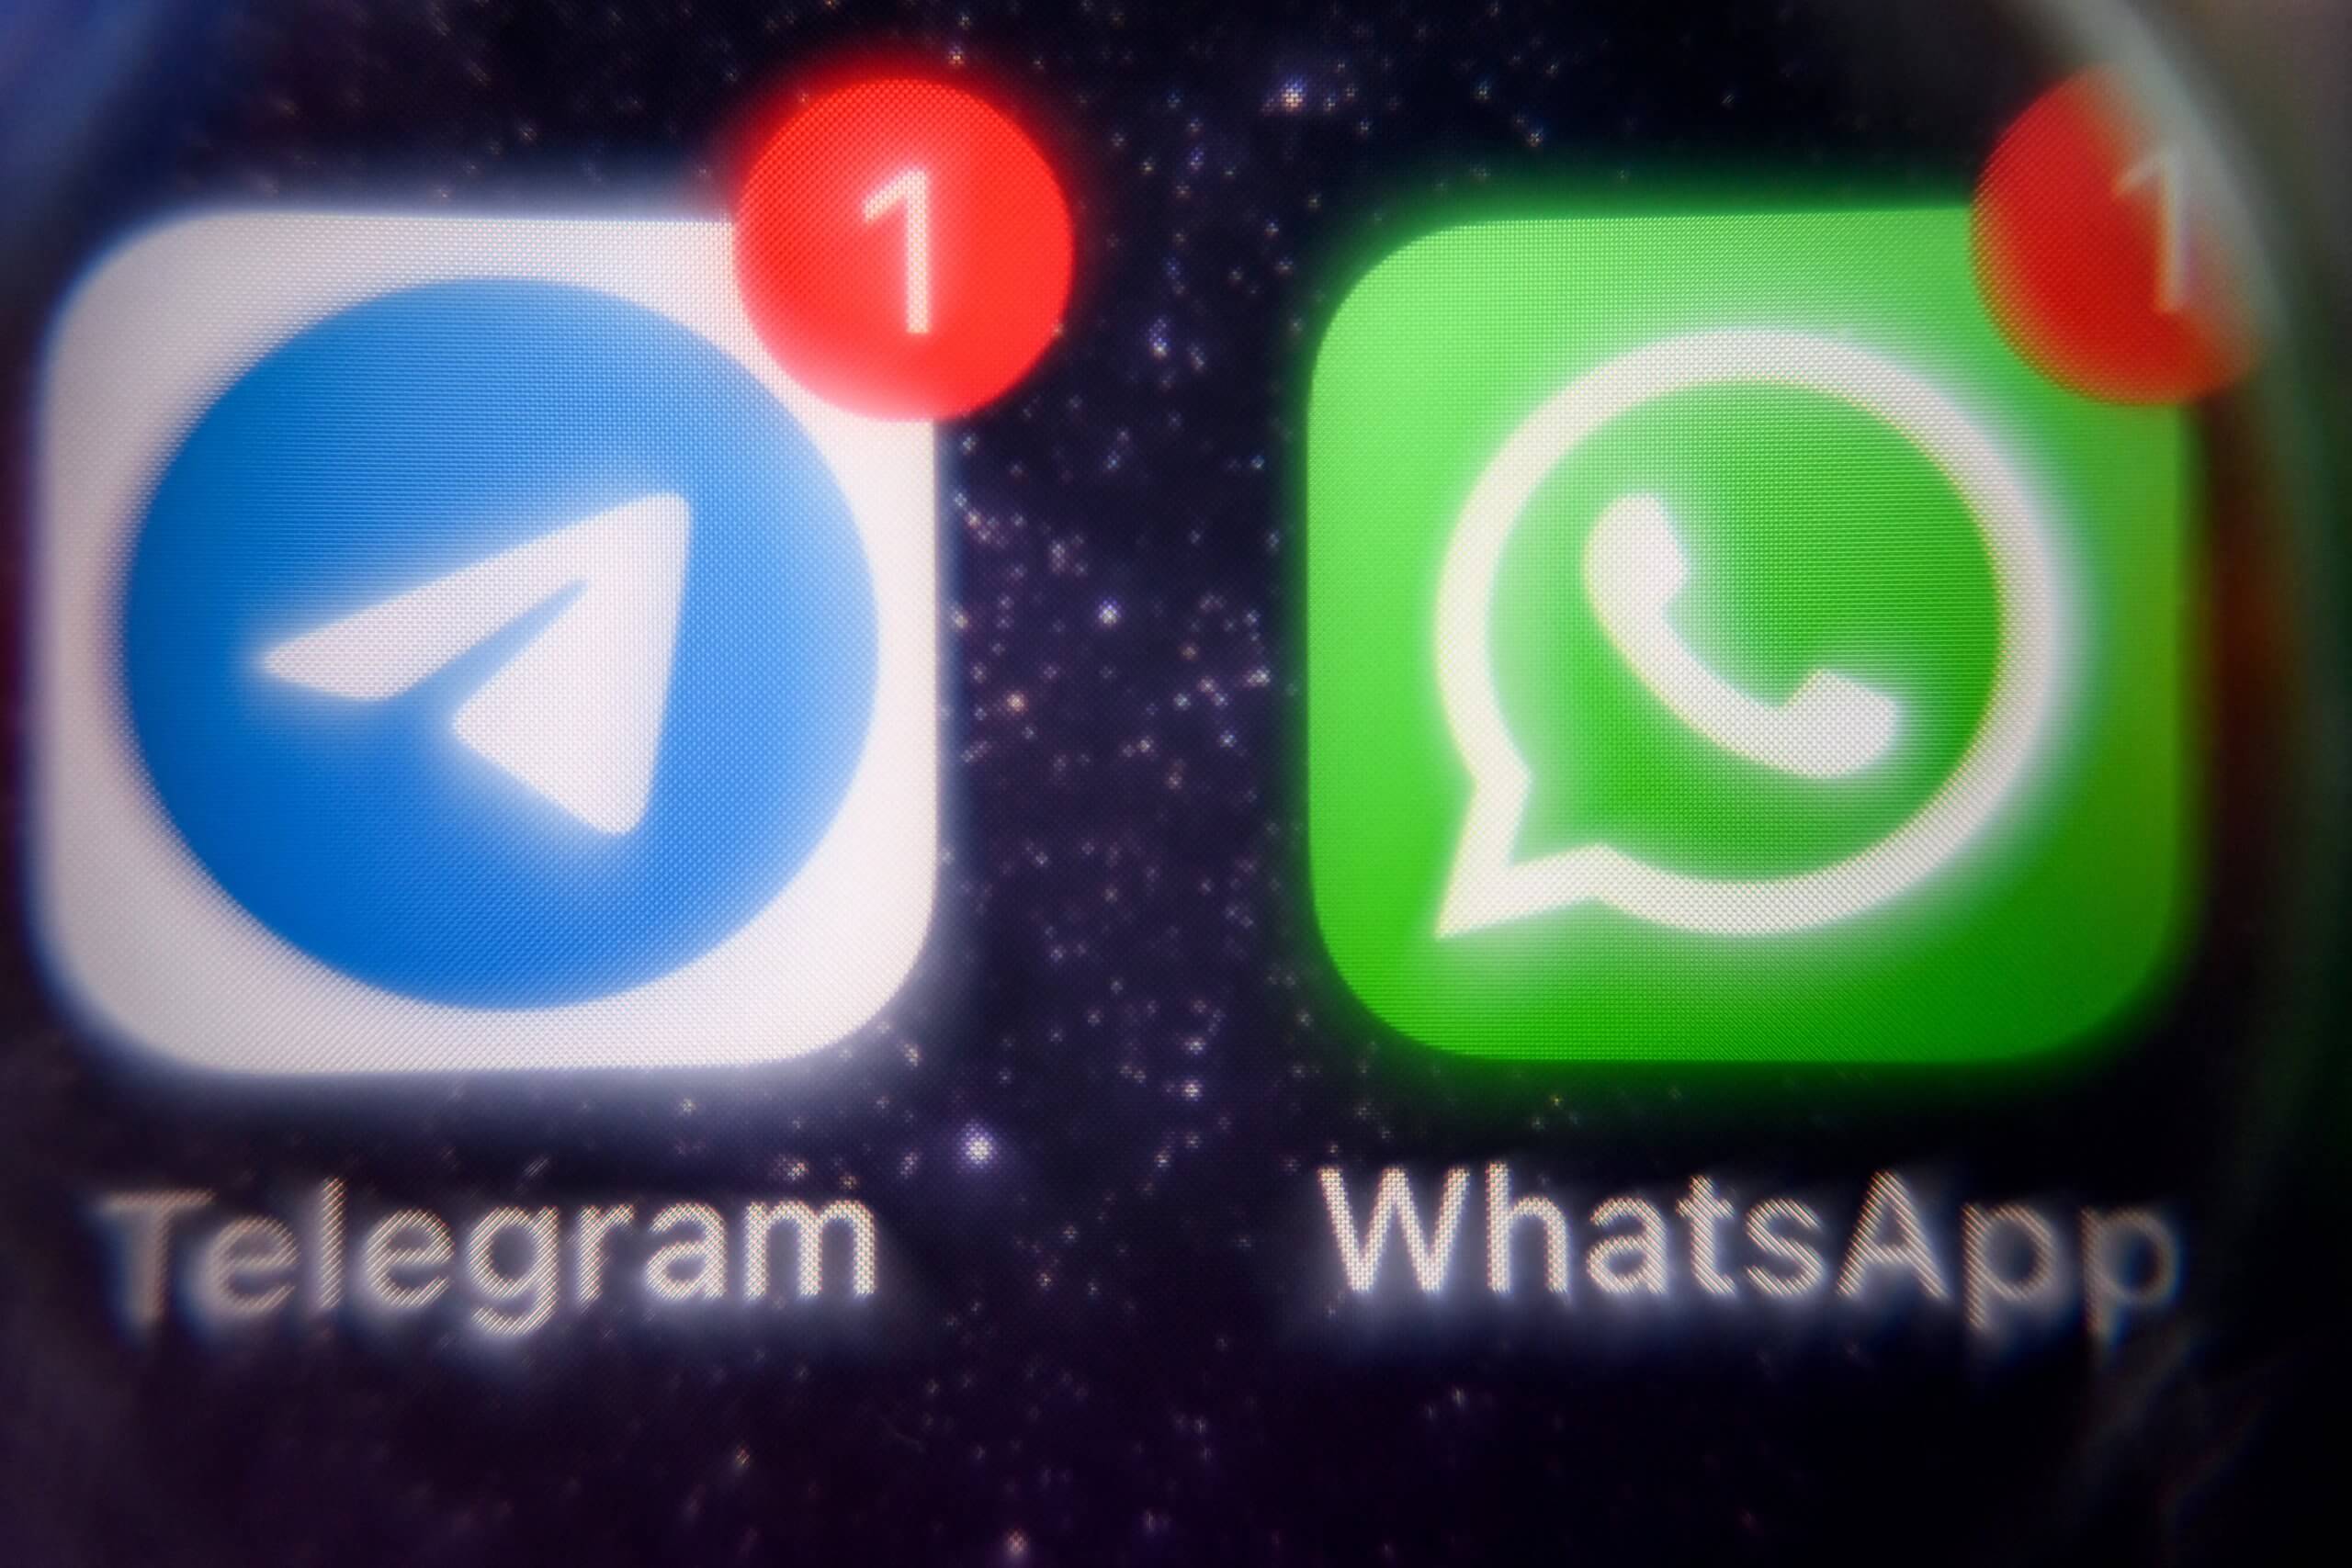 Messaging apps have gotten a pass in part because Meta-owned WhatsApp is less suited for mass communication, while Telegram's ability to blast information to large groups has made it useful both sides